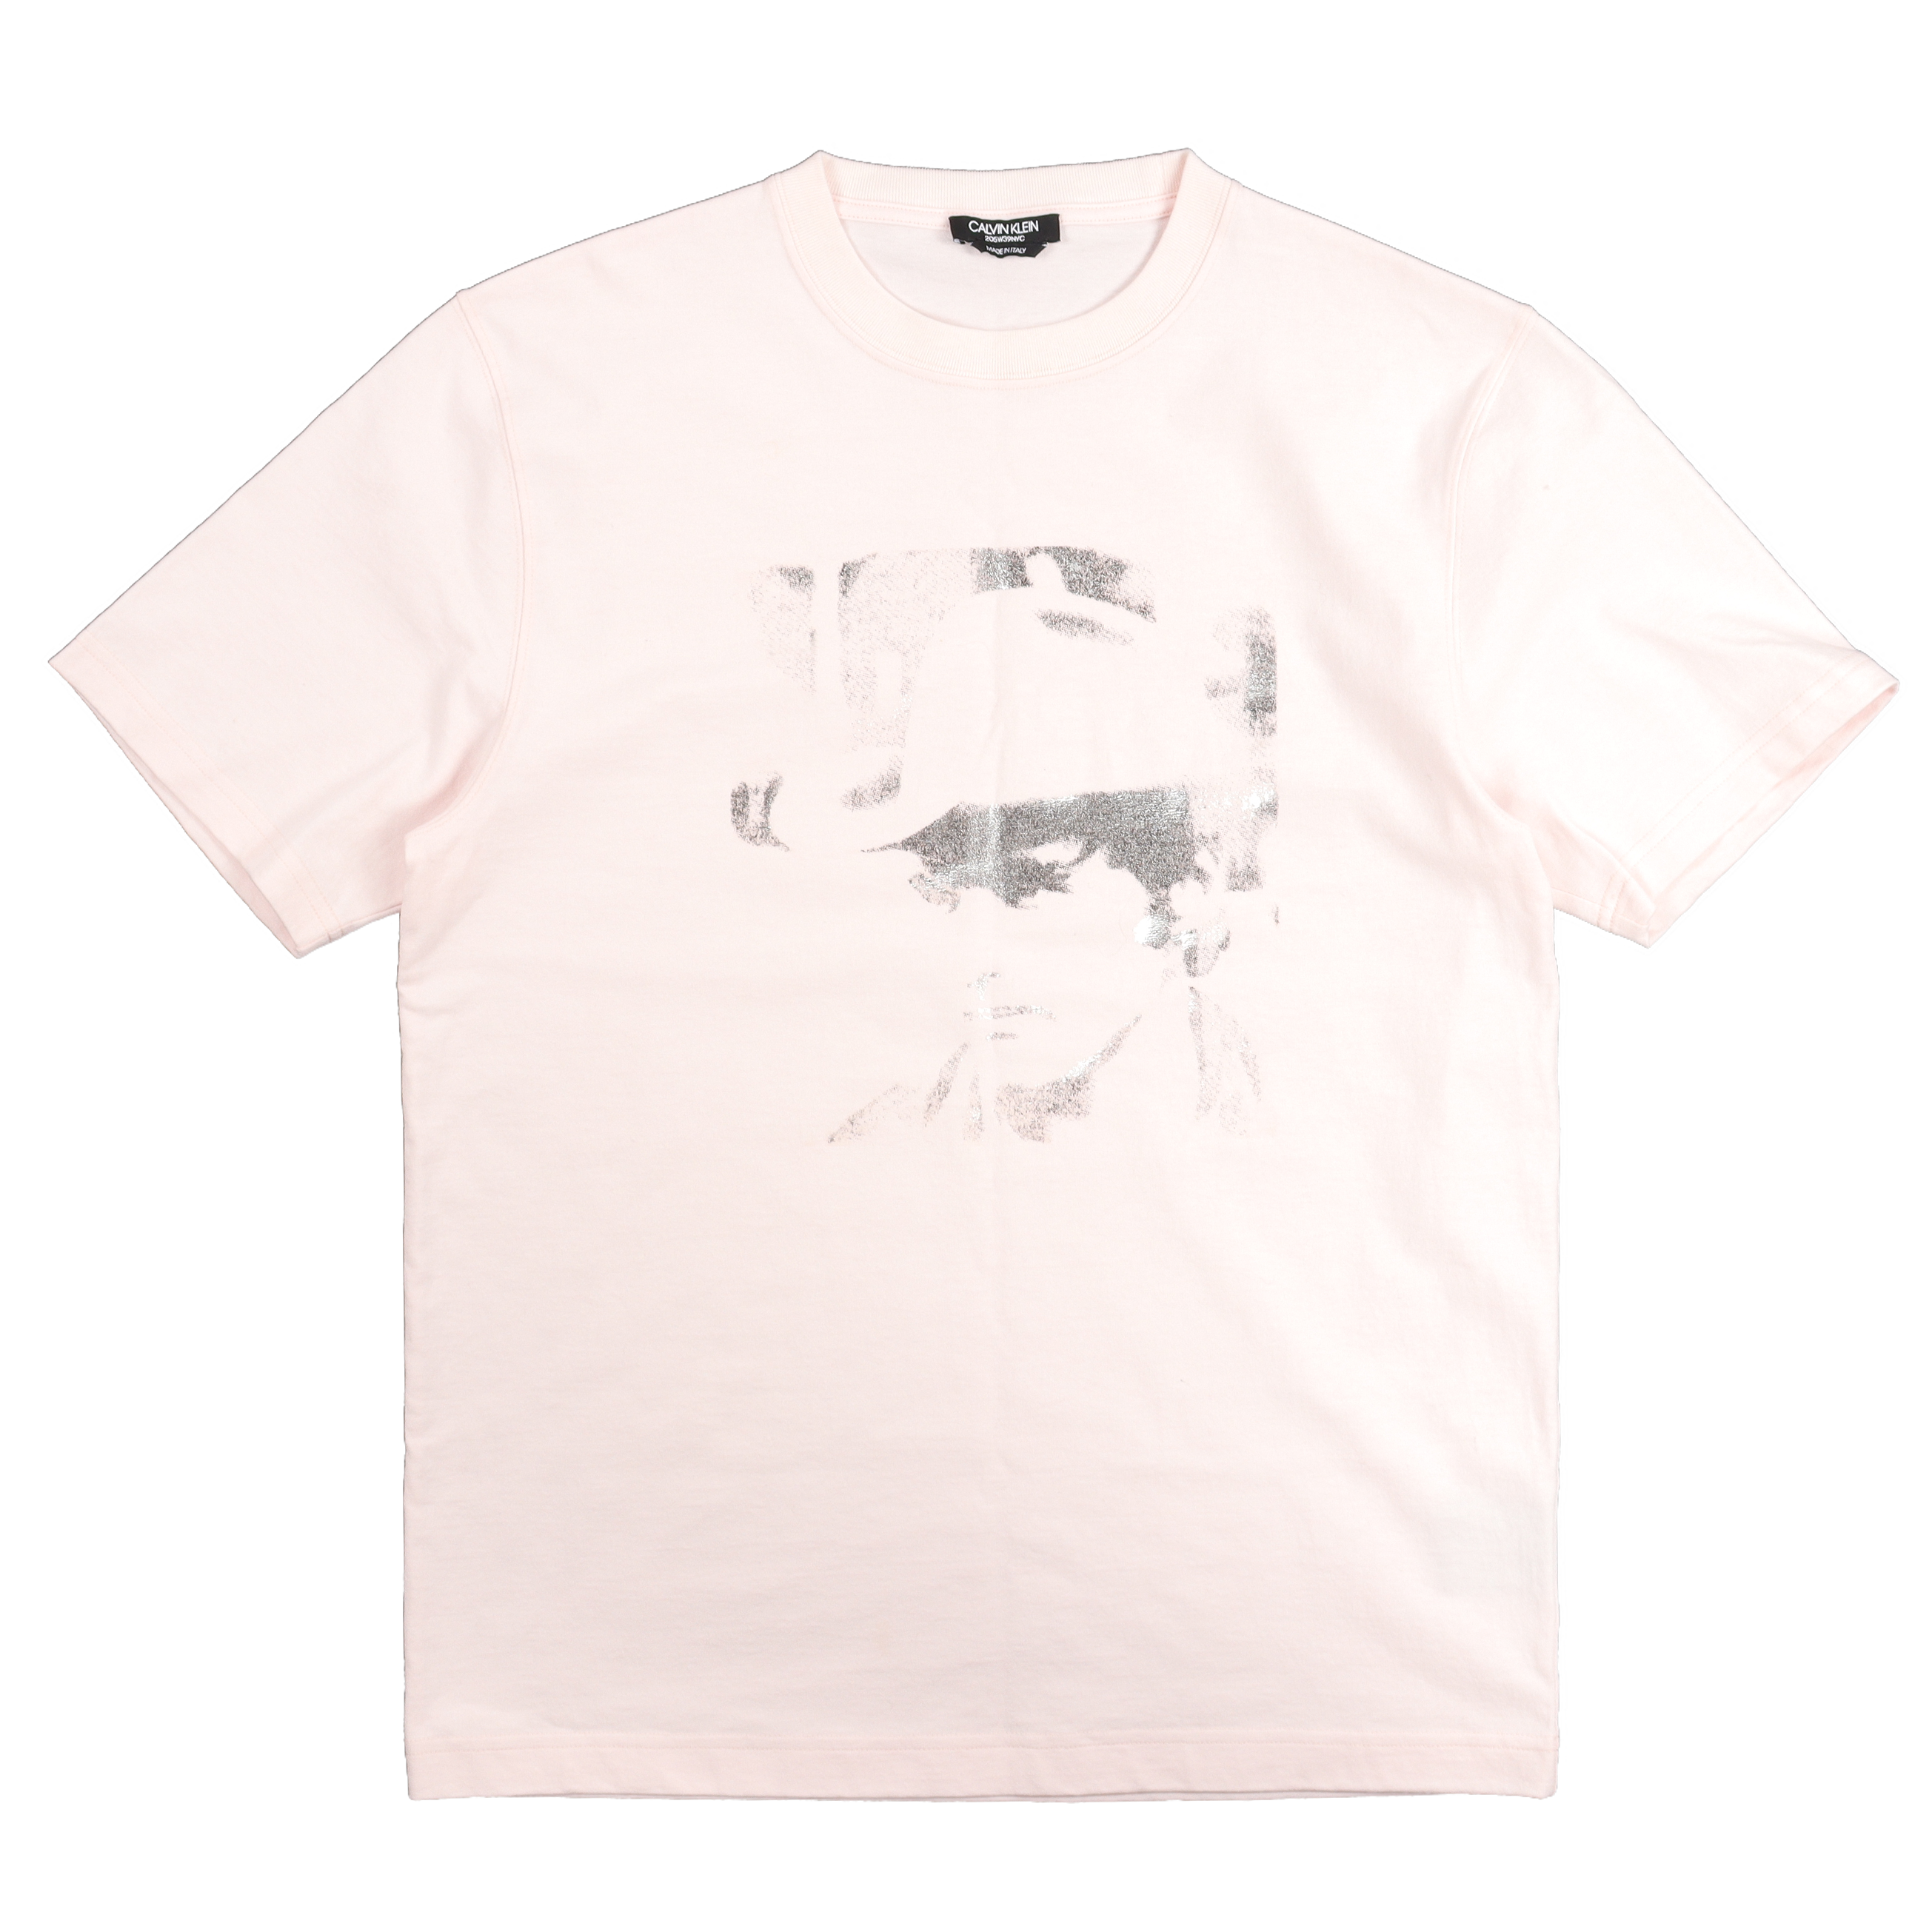 Graphic T-Shirt (Andy Warhol Collaboration)